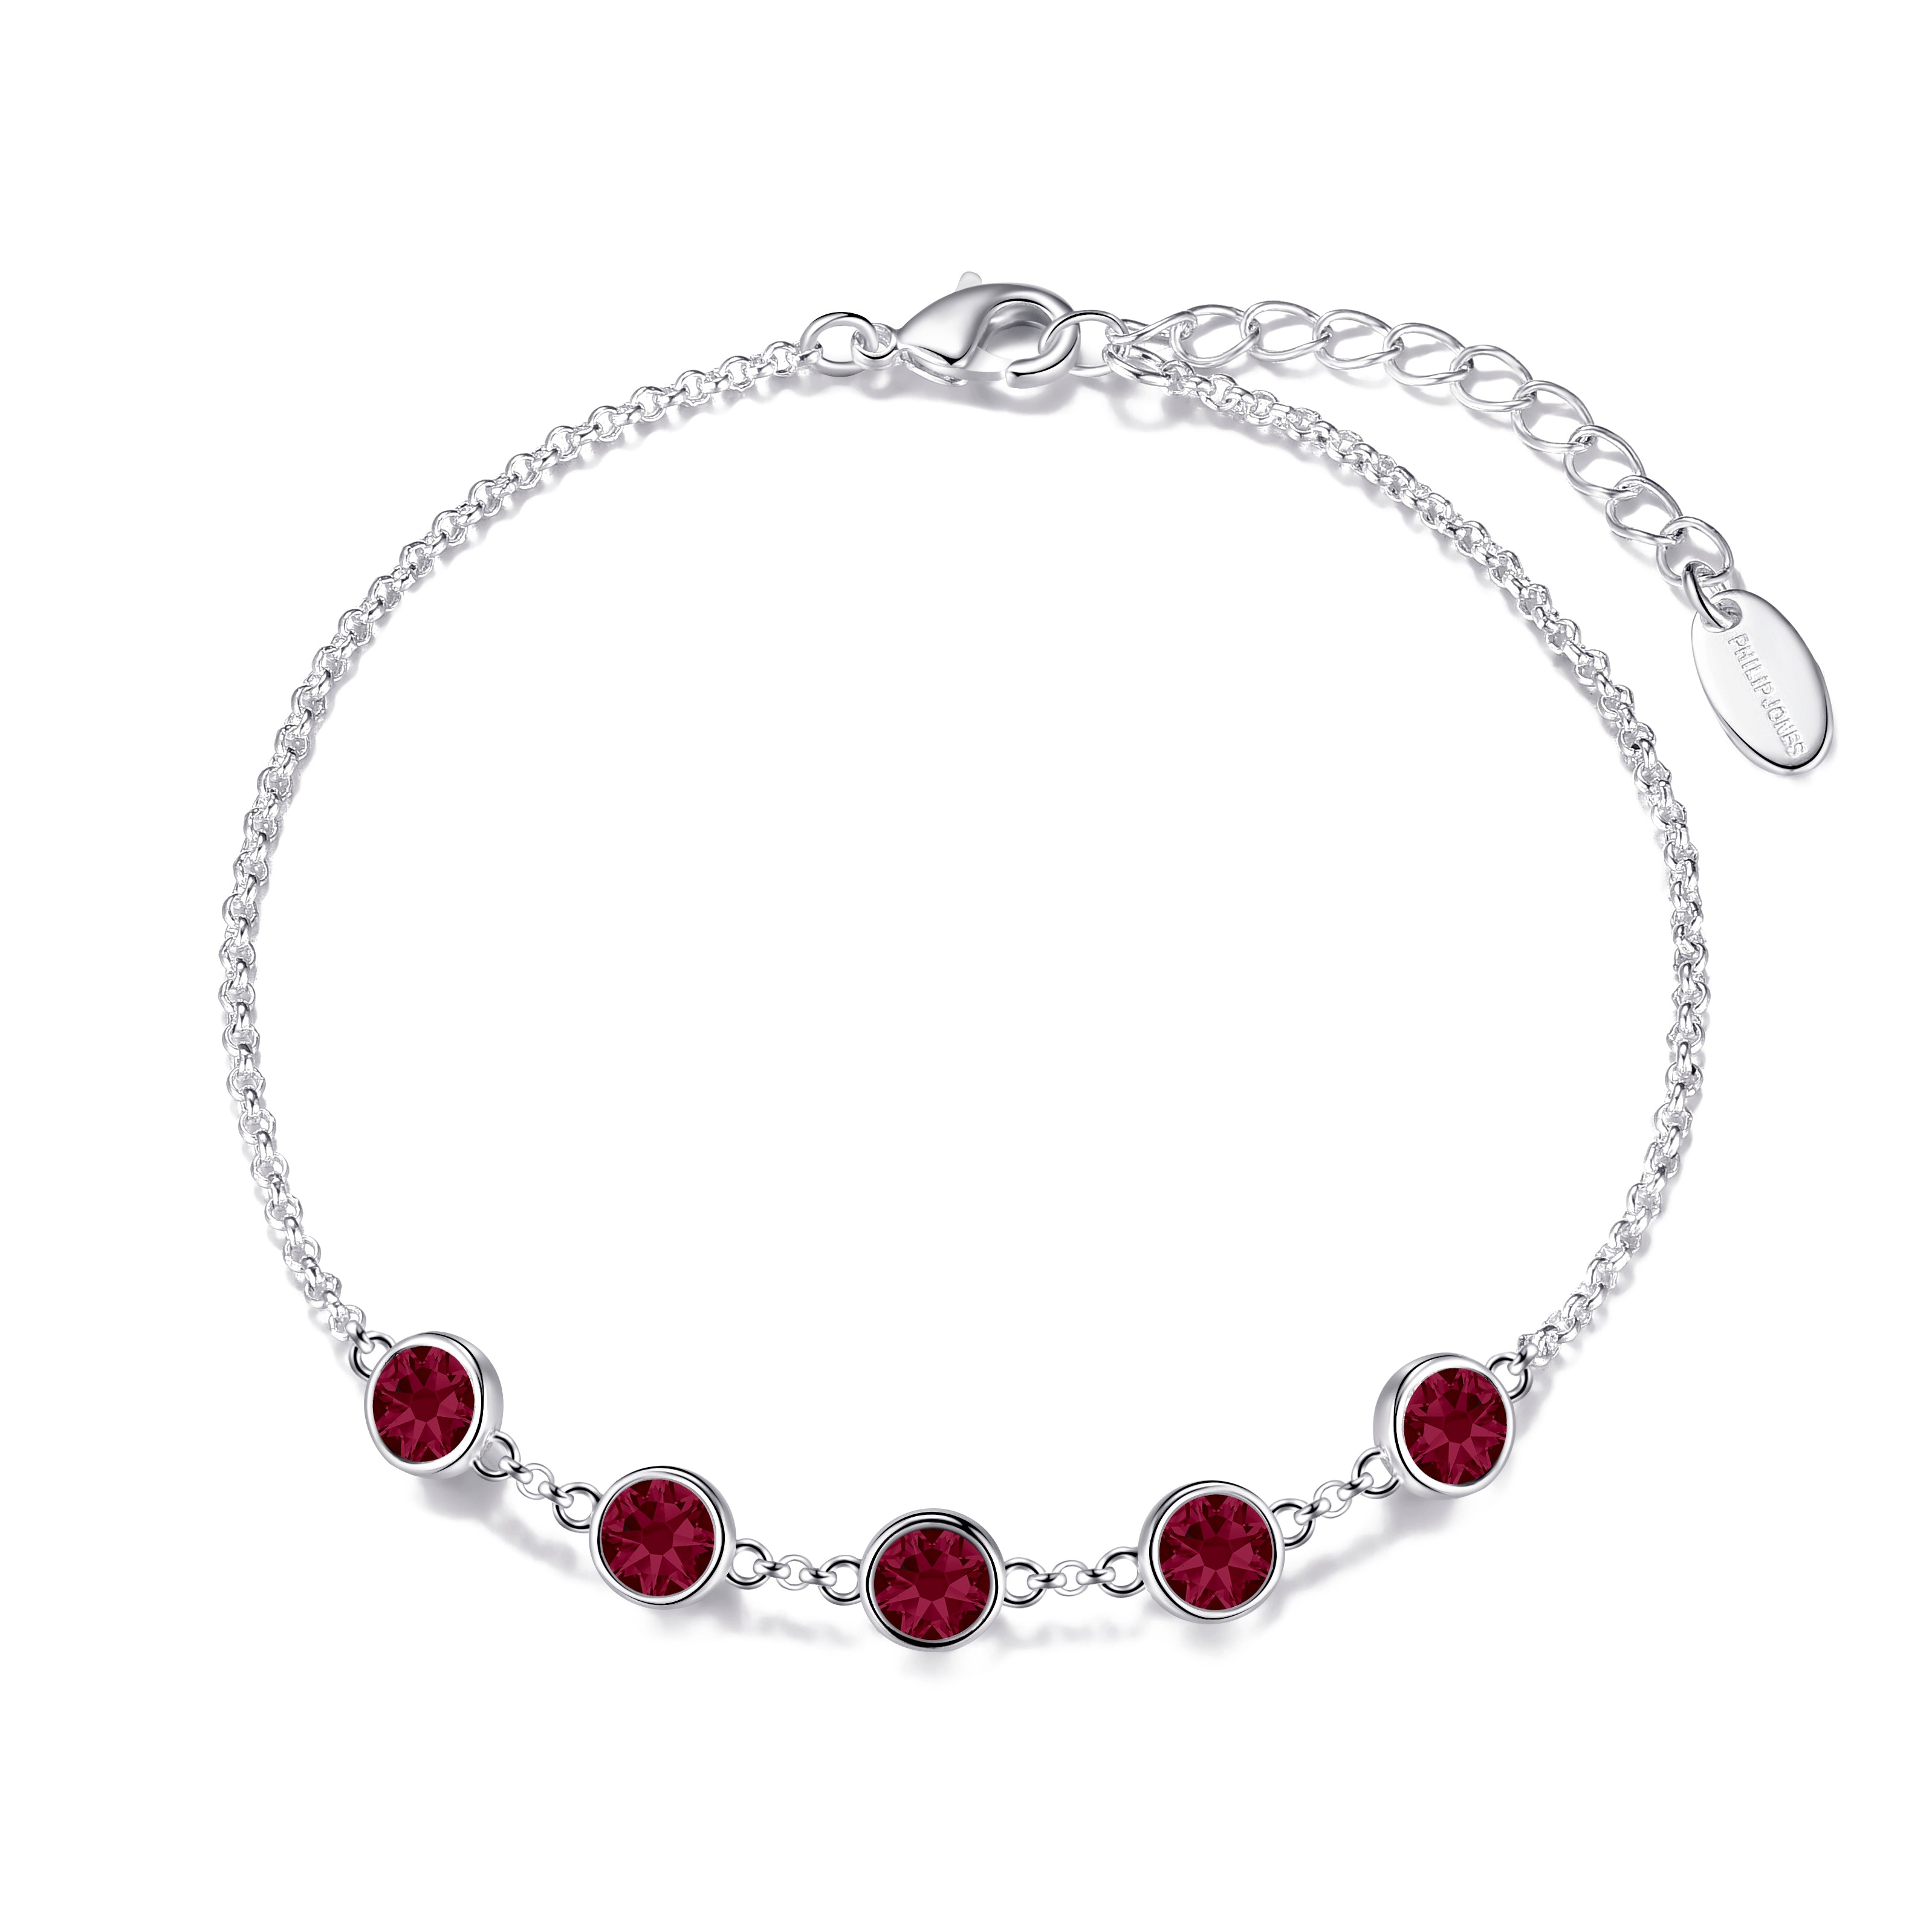 Red Crystal Chain Bracelet Created with Zircondia® Crystals by Philip Jones Jewellery